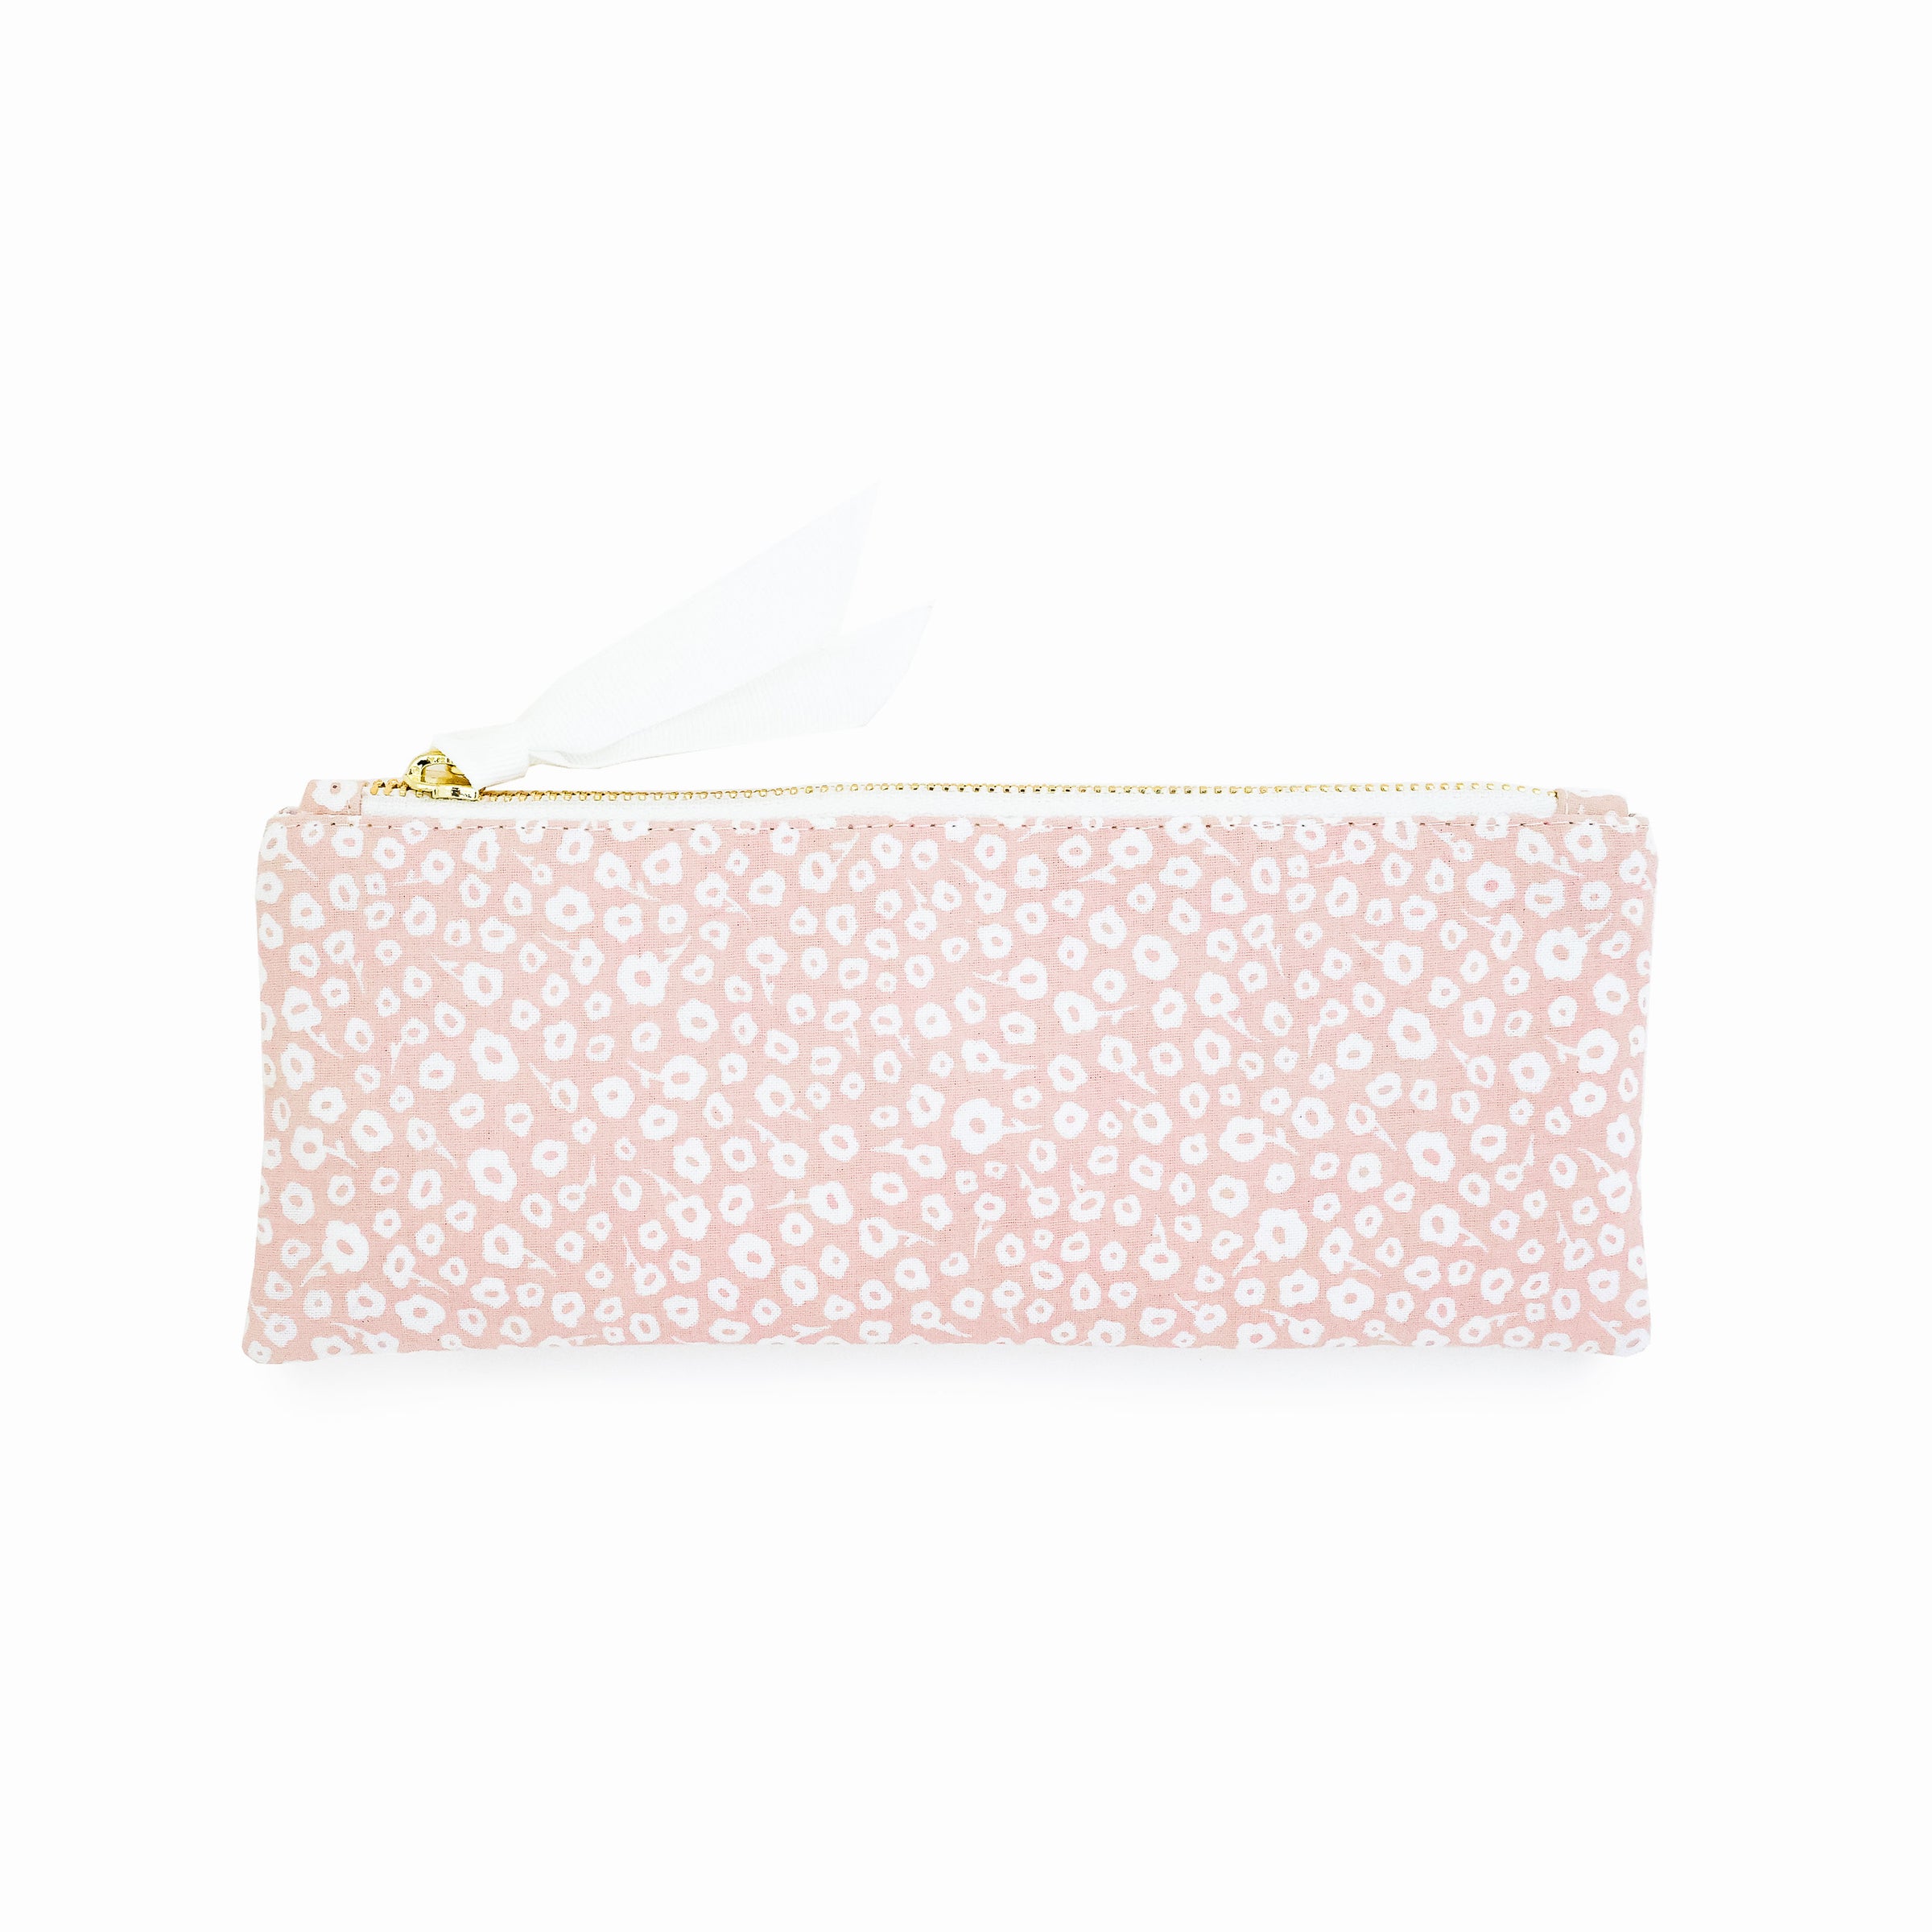 Cosmetic Bag Small Pouch Pencil Case Black with Pink Flowers Floral Pr